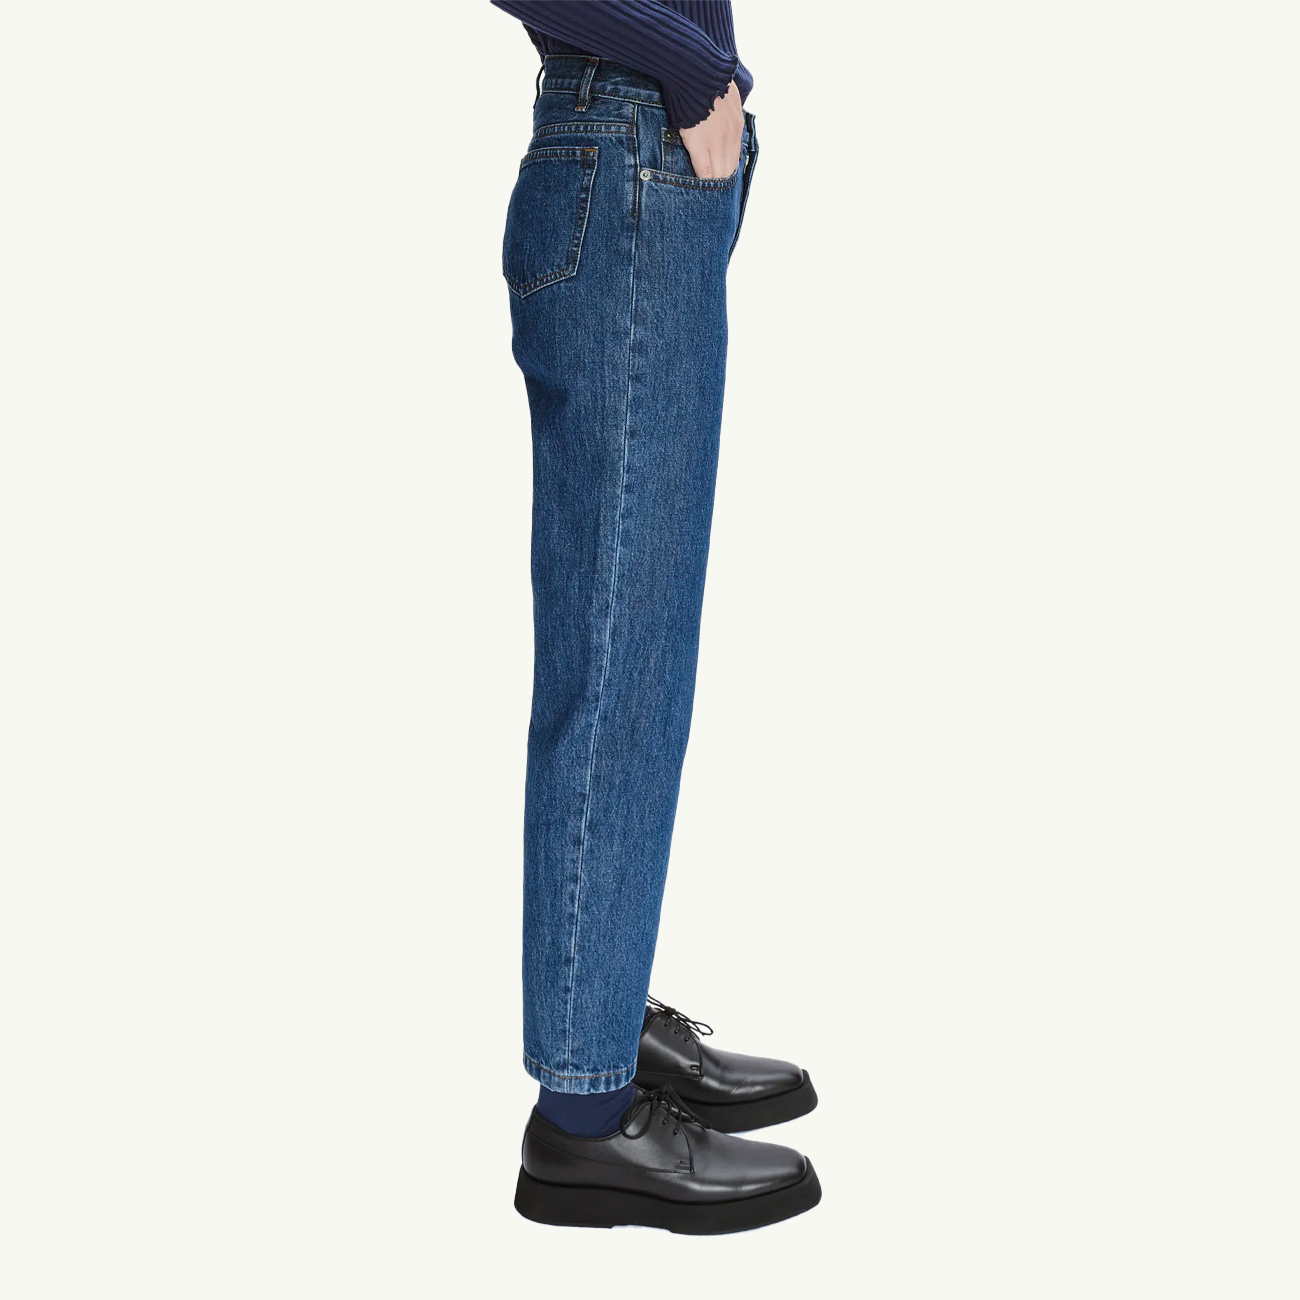 Women's Relaxed Jean - Indigo Washed